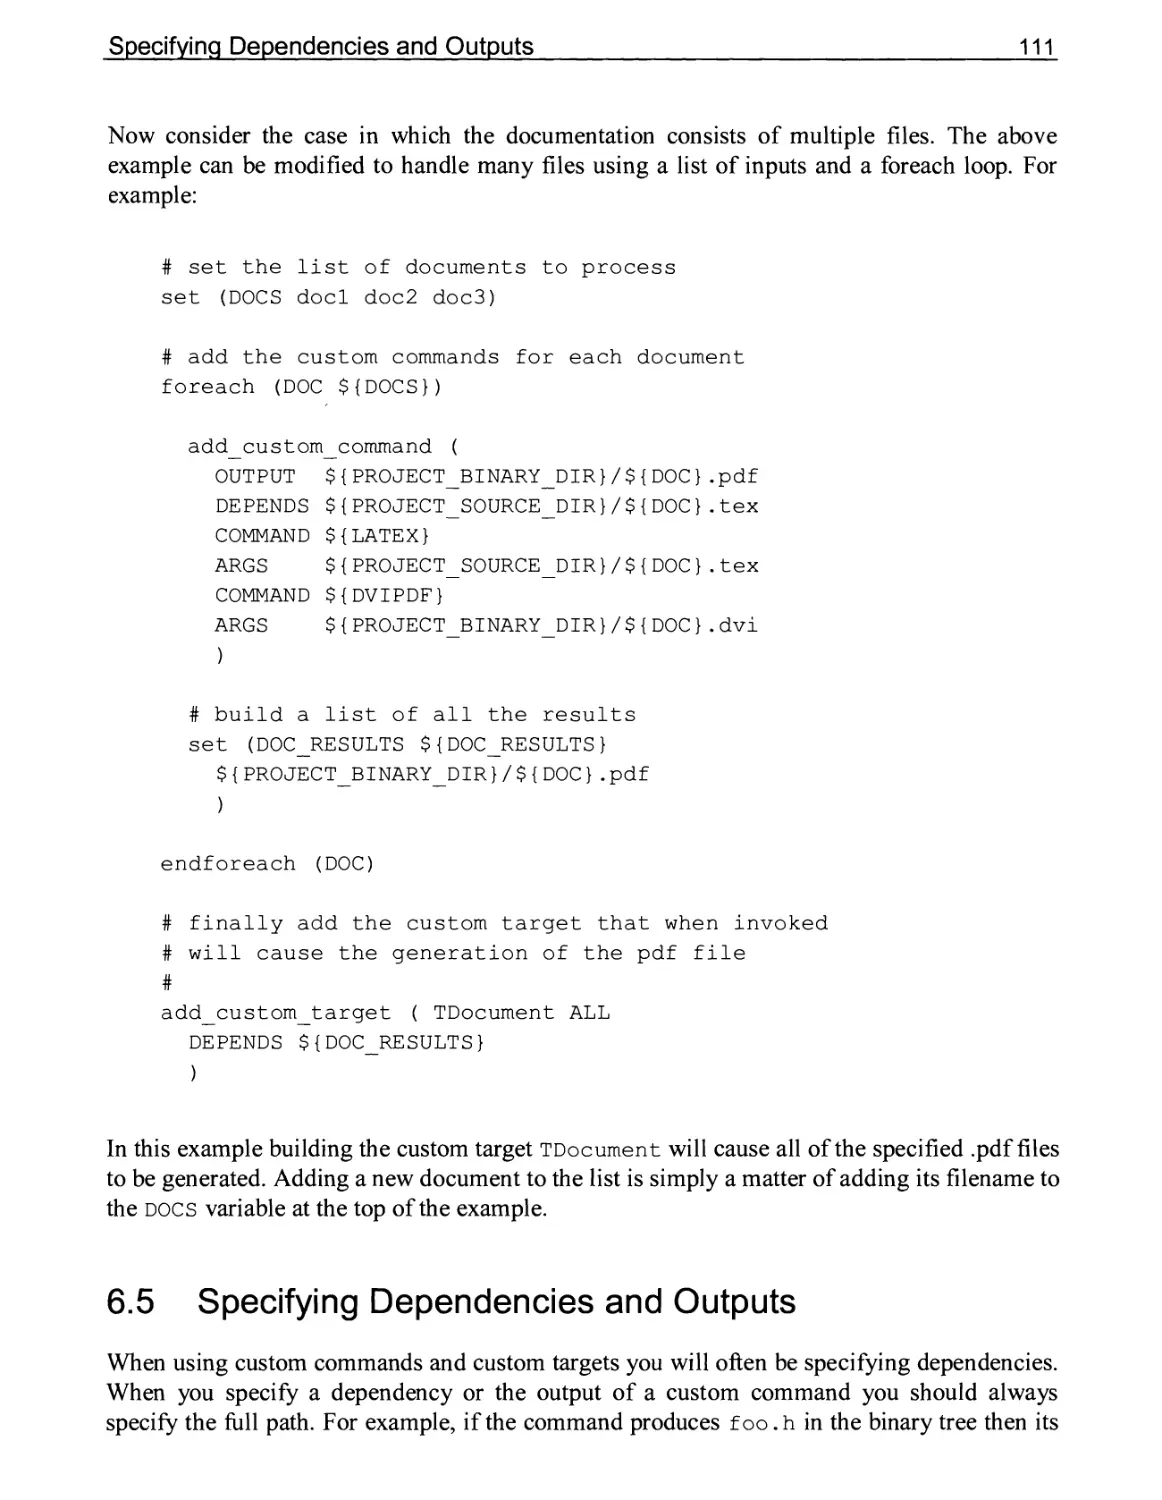 6.5 Specifying Dependencies and Outputs